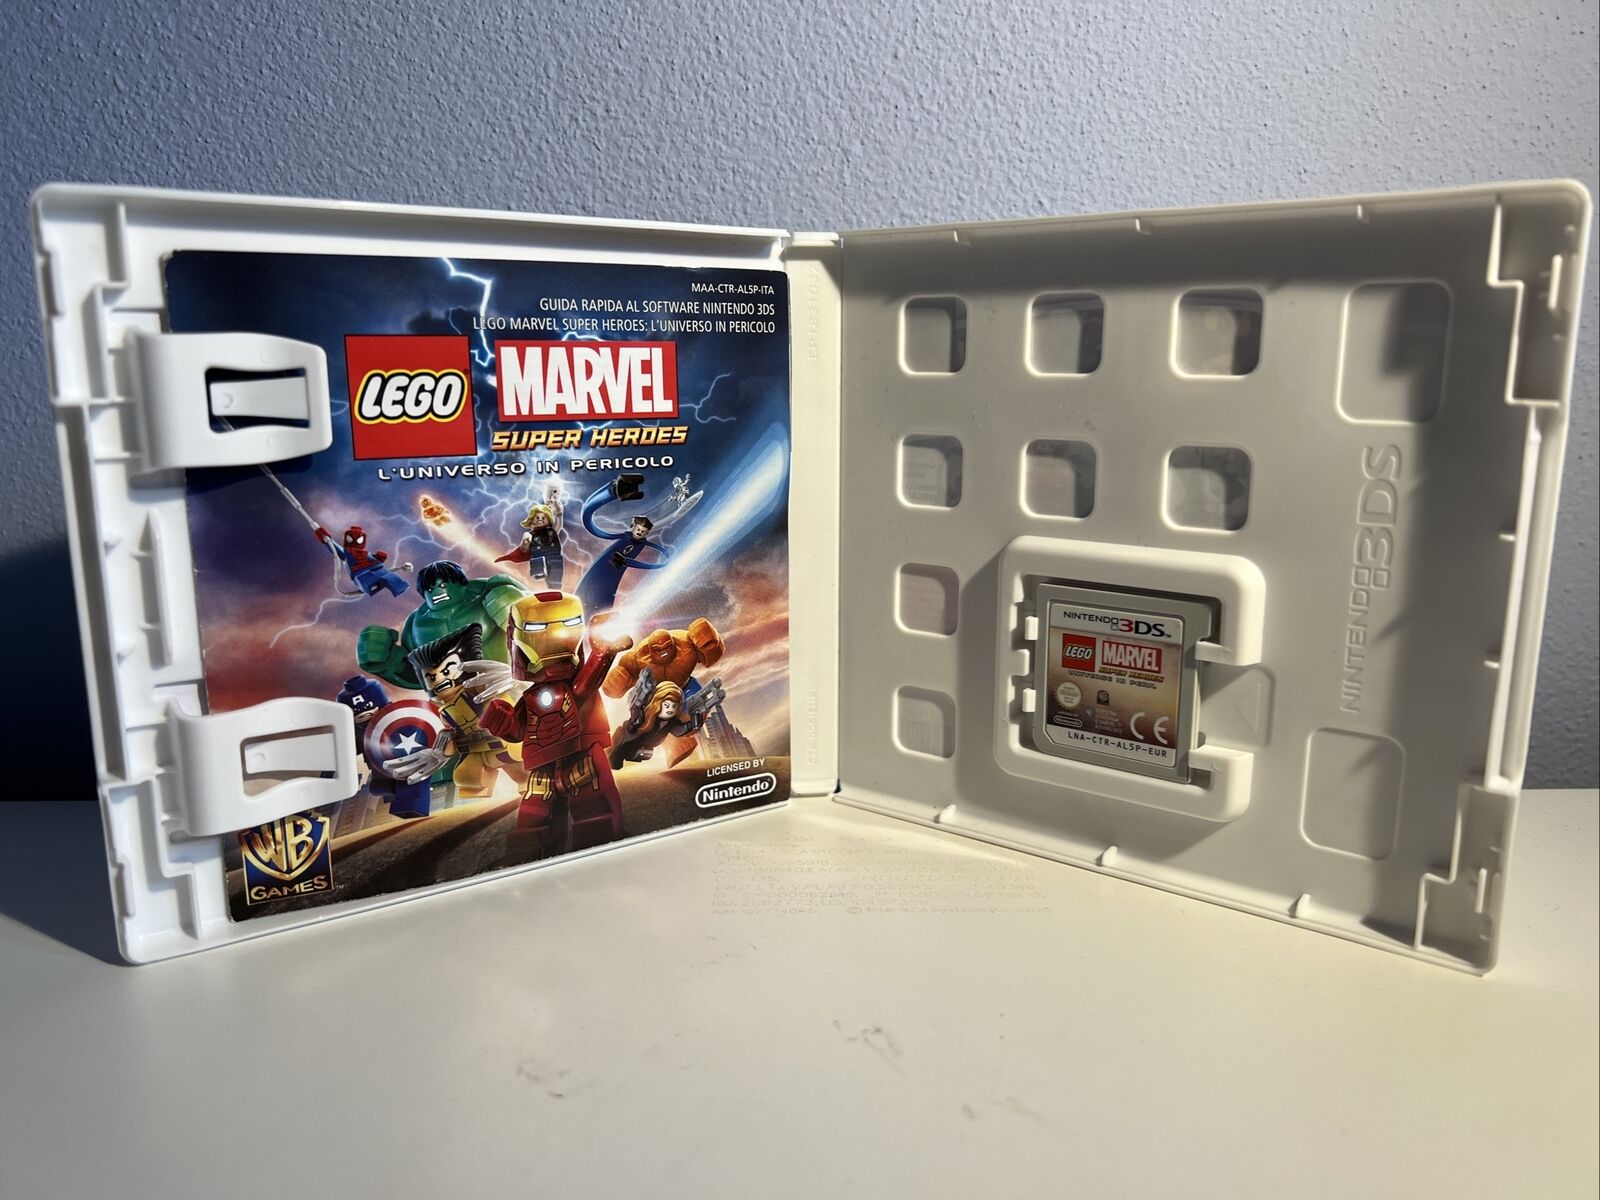 Nintendo-3DS2DS-videogame-Lego-Marvel-Super-Heroes-Luniverso-In-Pericolo-133937276758-4